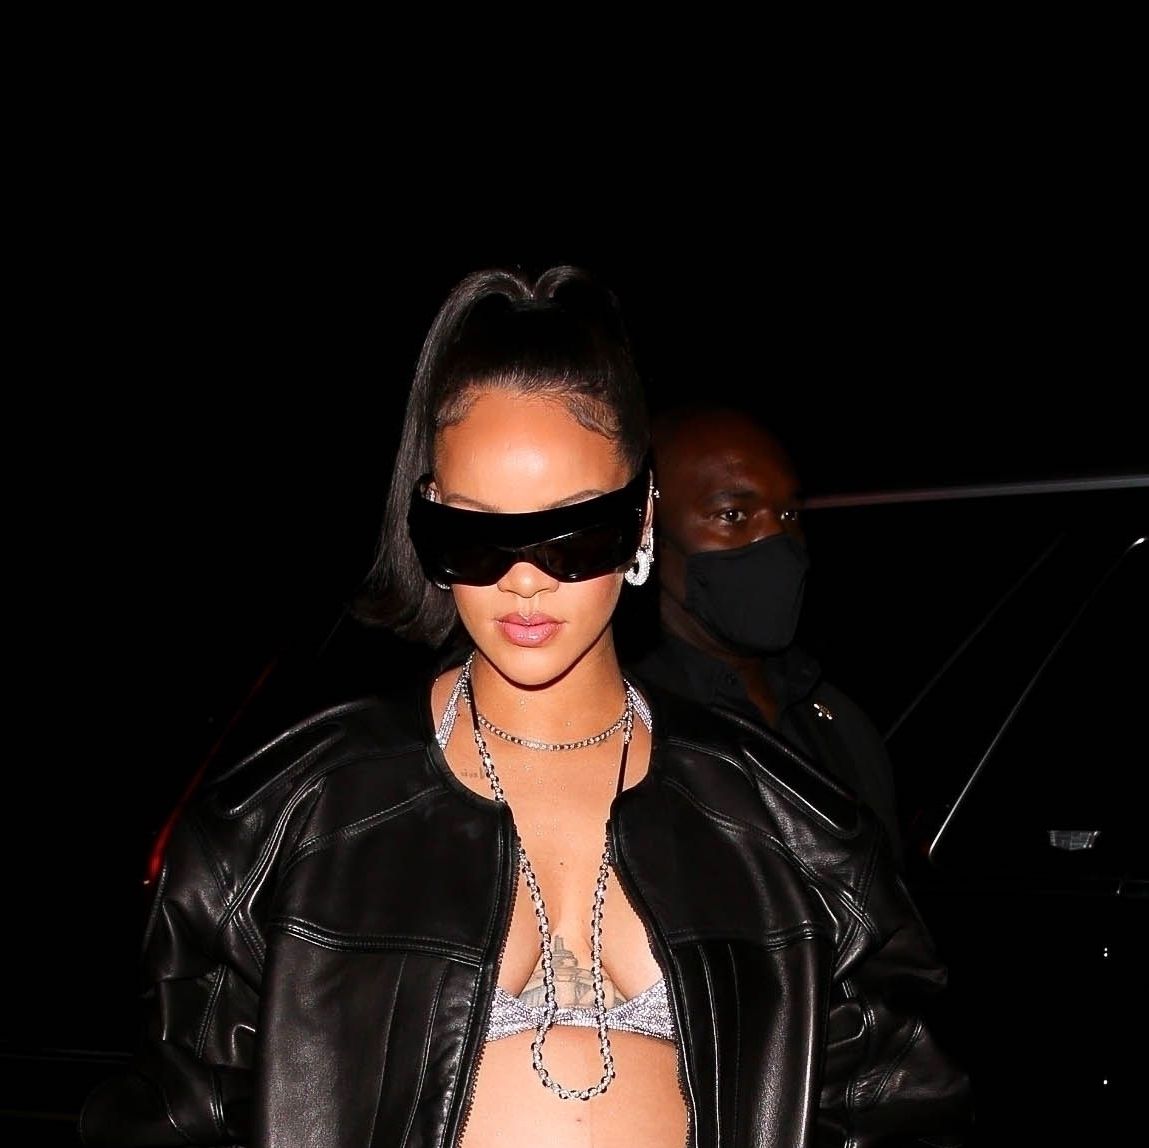 Rihanna's maternity style is rightfully earning acclaim from everyone.